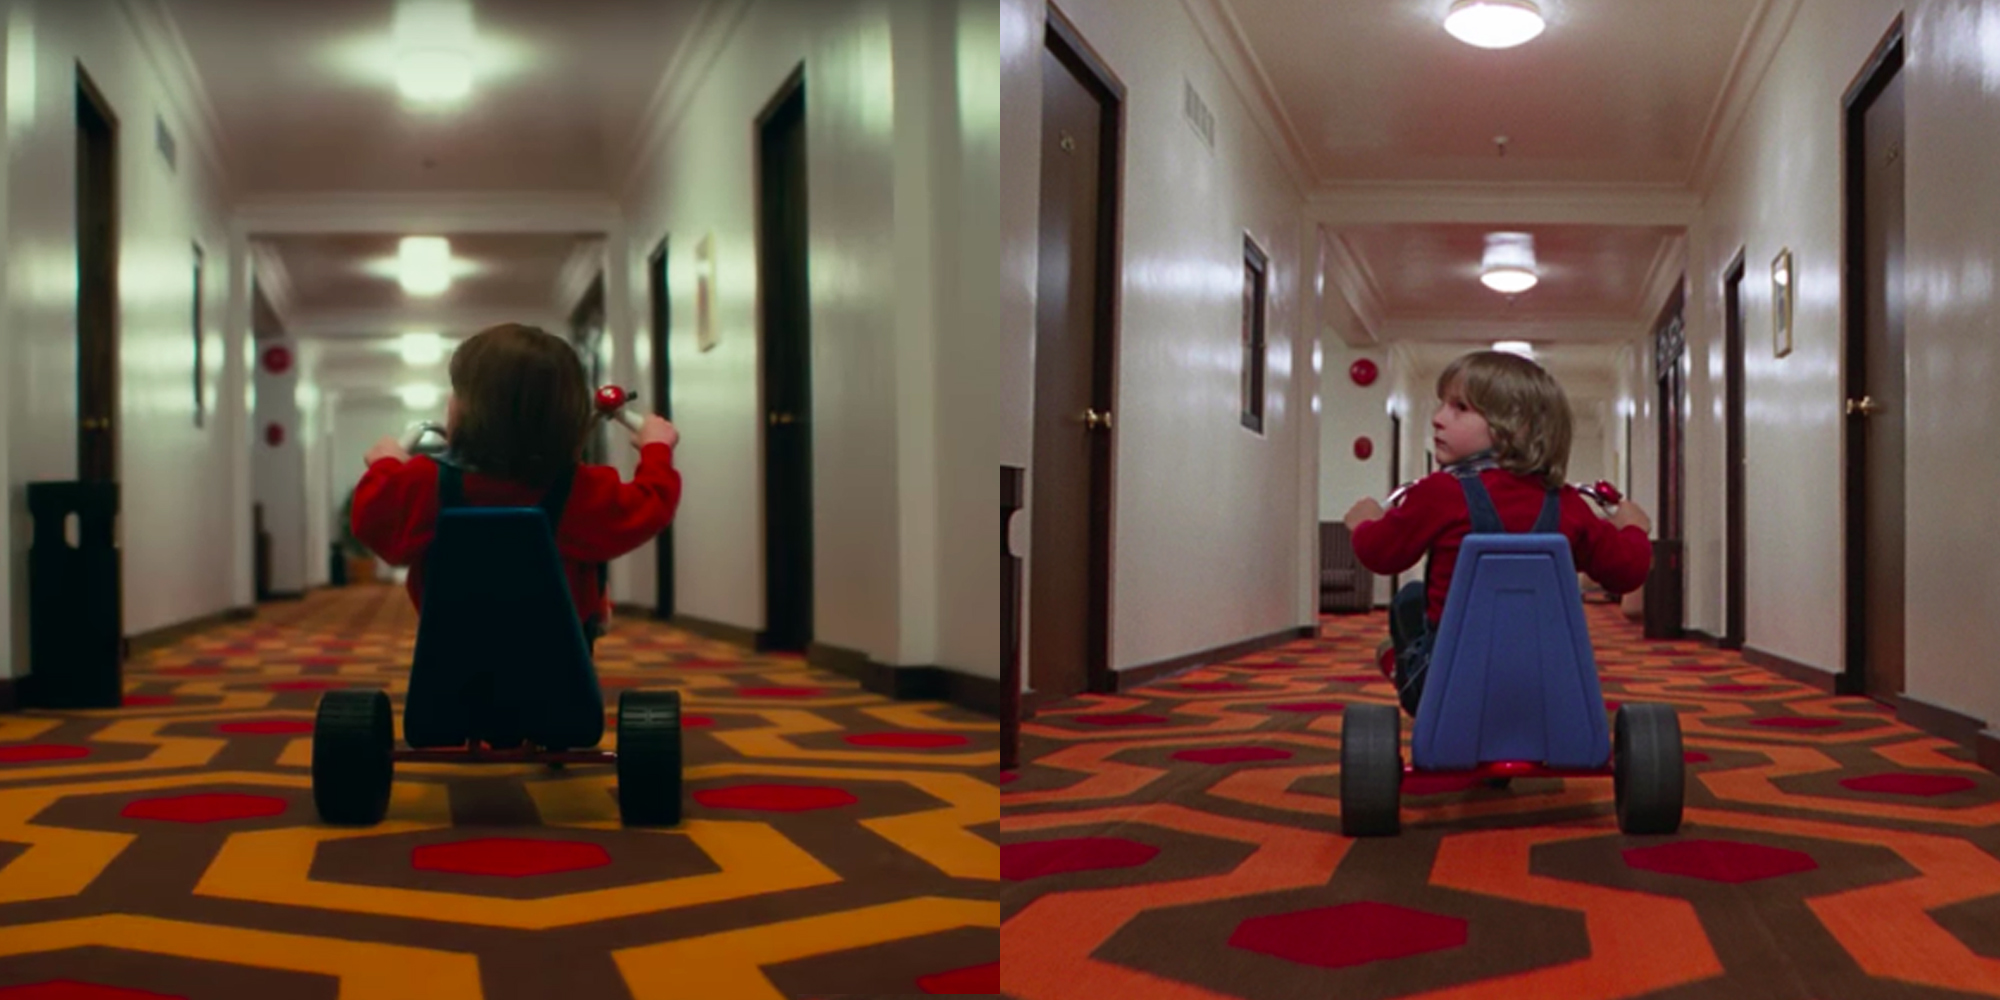 6 References To The Shining In The Doctor Sleep Trailer